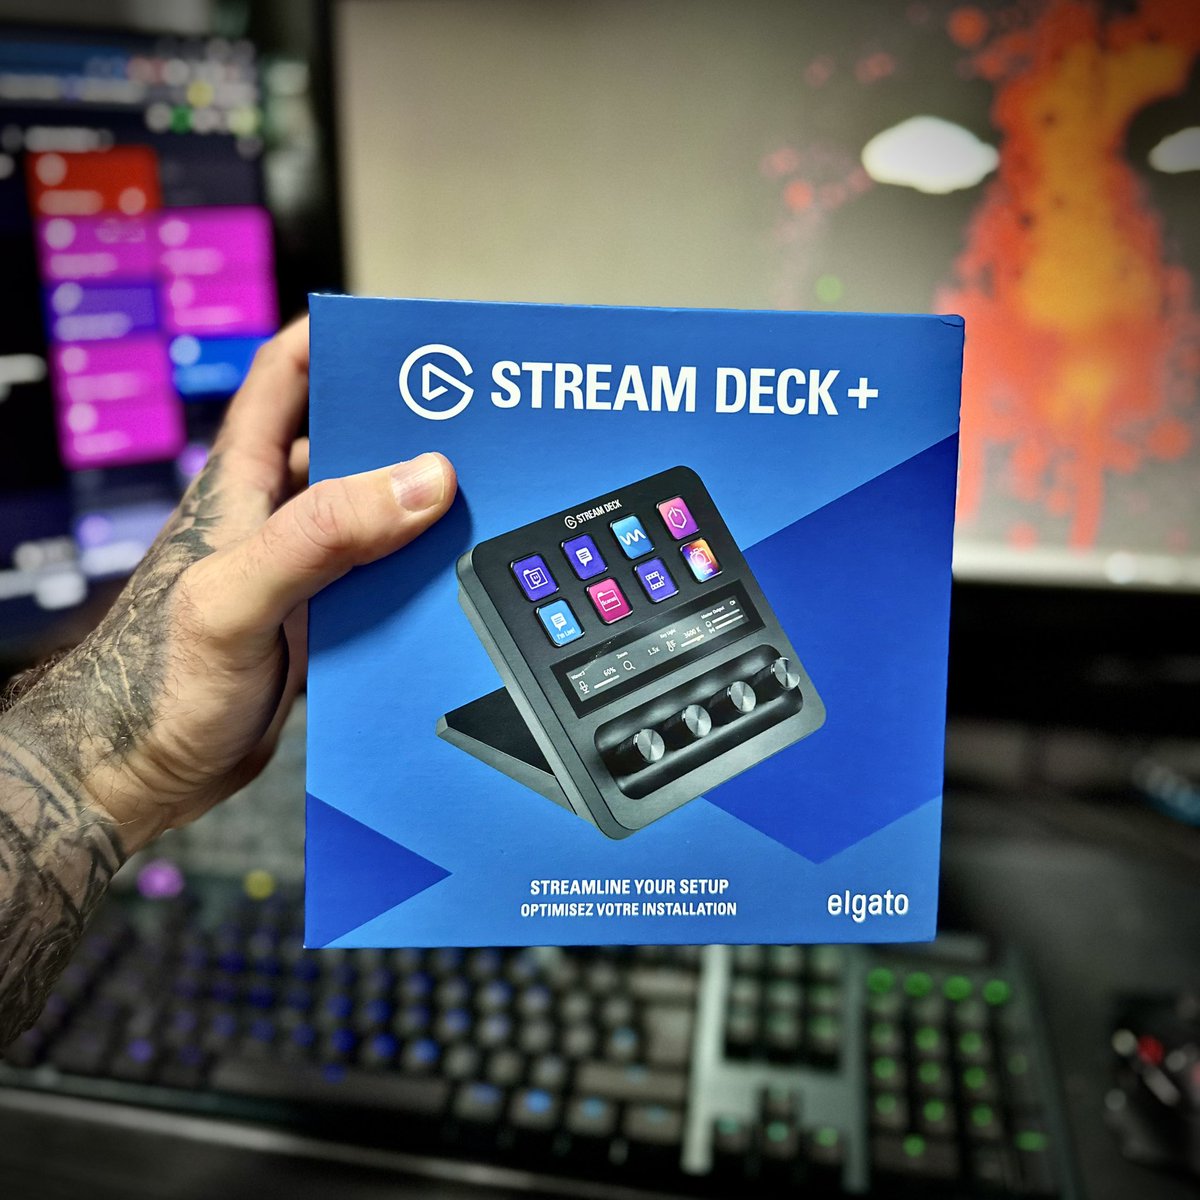 Anyone else just buy stuff for streaming without actually thinking before hand if you need it or not? 🤦🏻‍♂️

#elgato #streaming #streamdeck #sponsorme